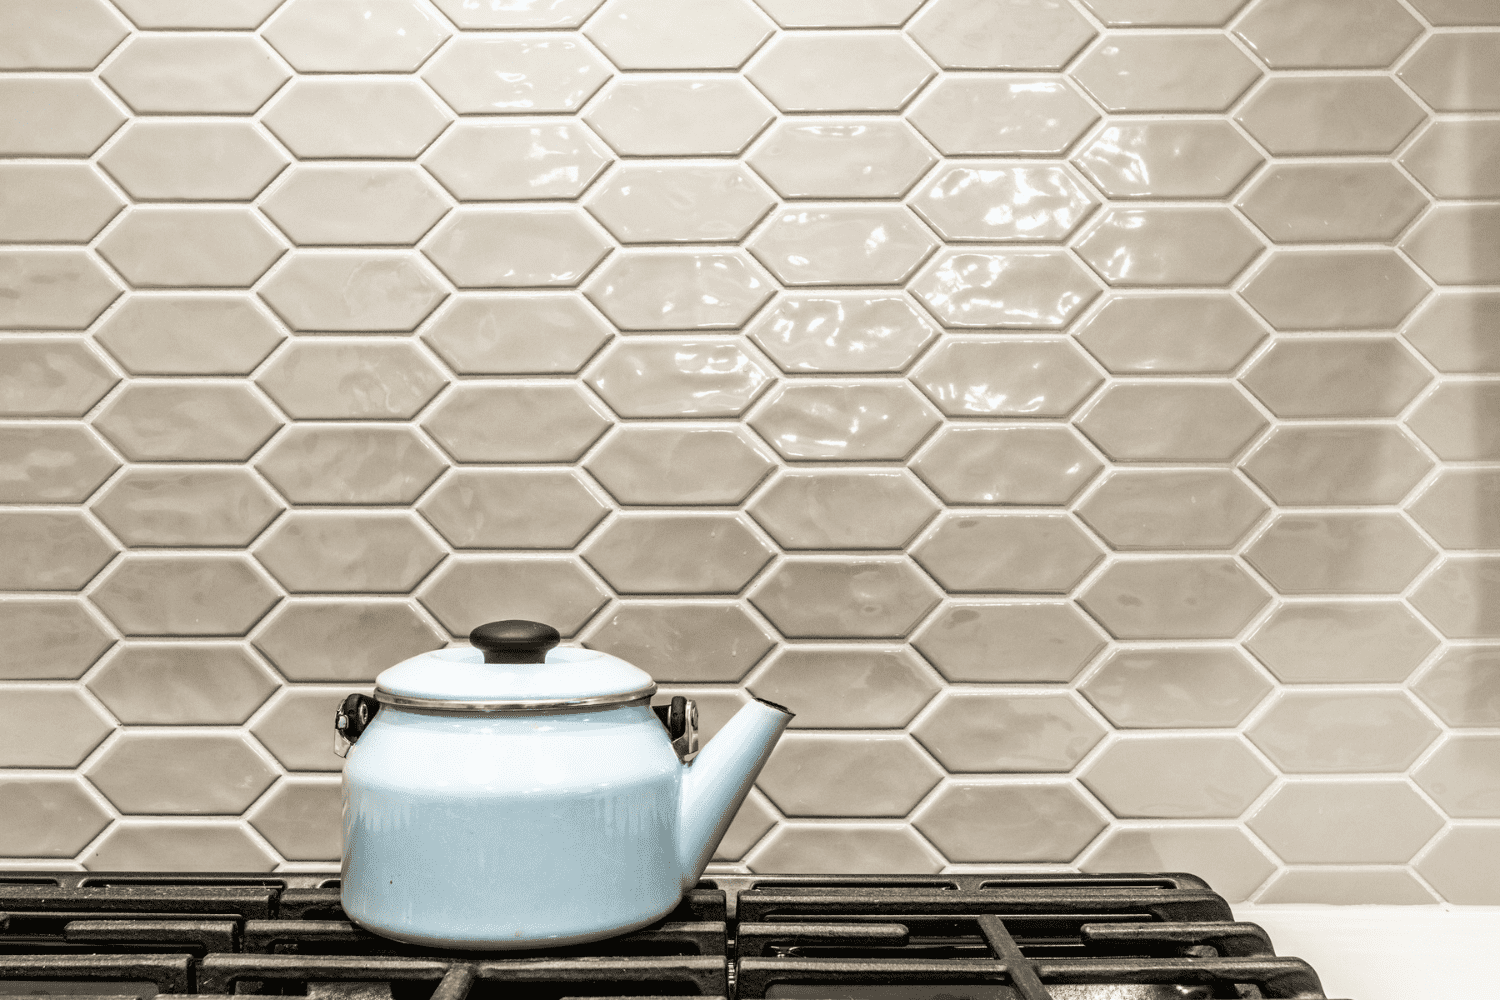 Nicholas Design Build | In a neutral kitchen, a blue teapot sits on top of a stove.